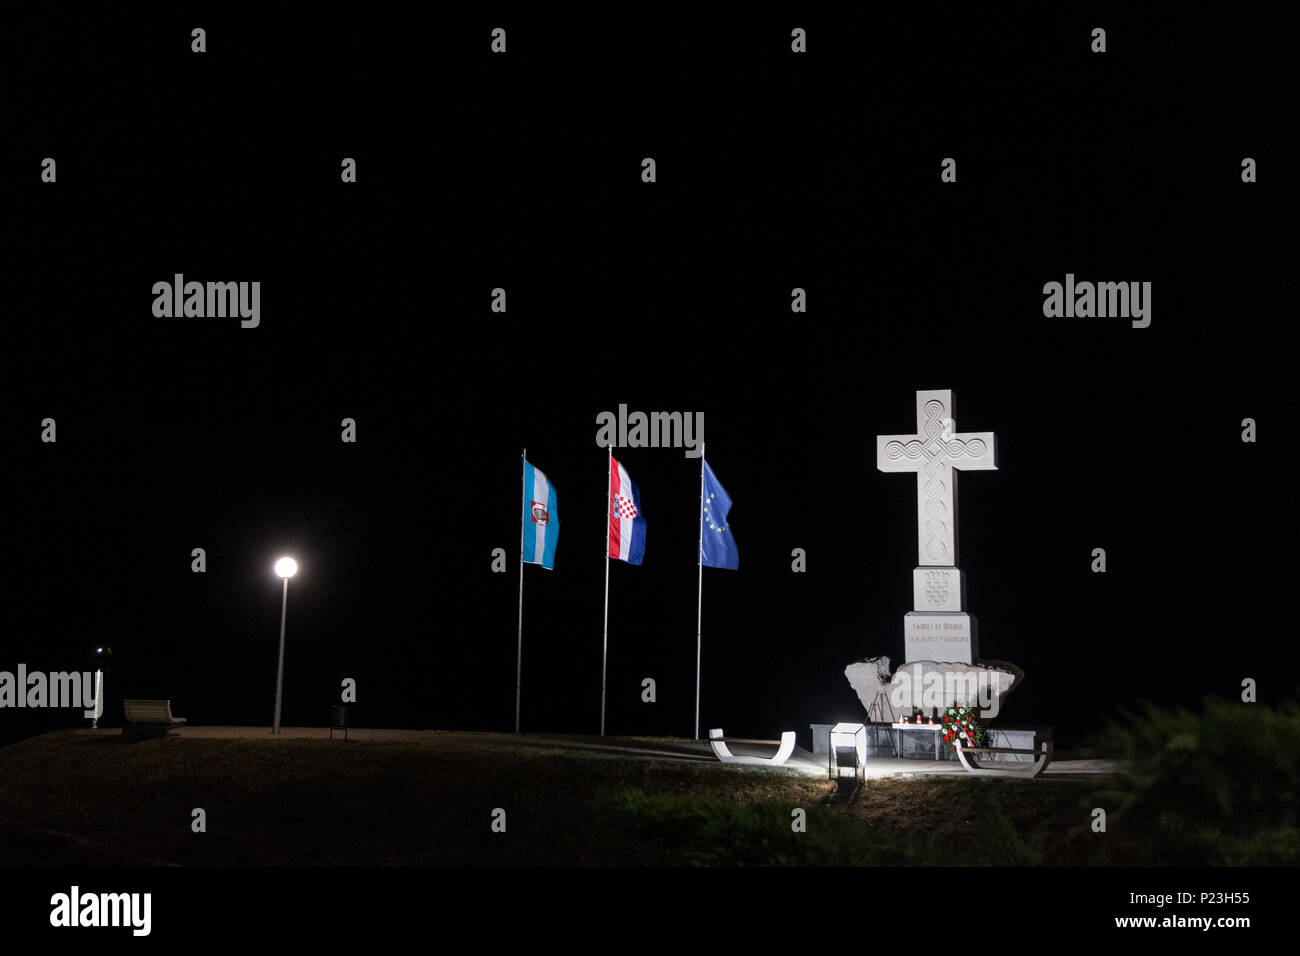 VUKOVAR, CROATIA - MAY 13, 2018: Moument dedicated to the defenders of Vukovar in the Homeland war of 1991-1995, made of a Christian cross with Europe Stock Photo